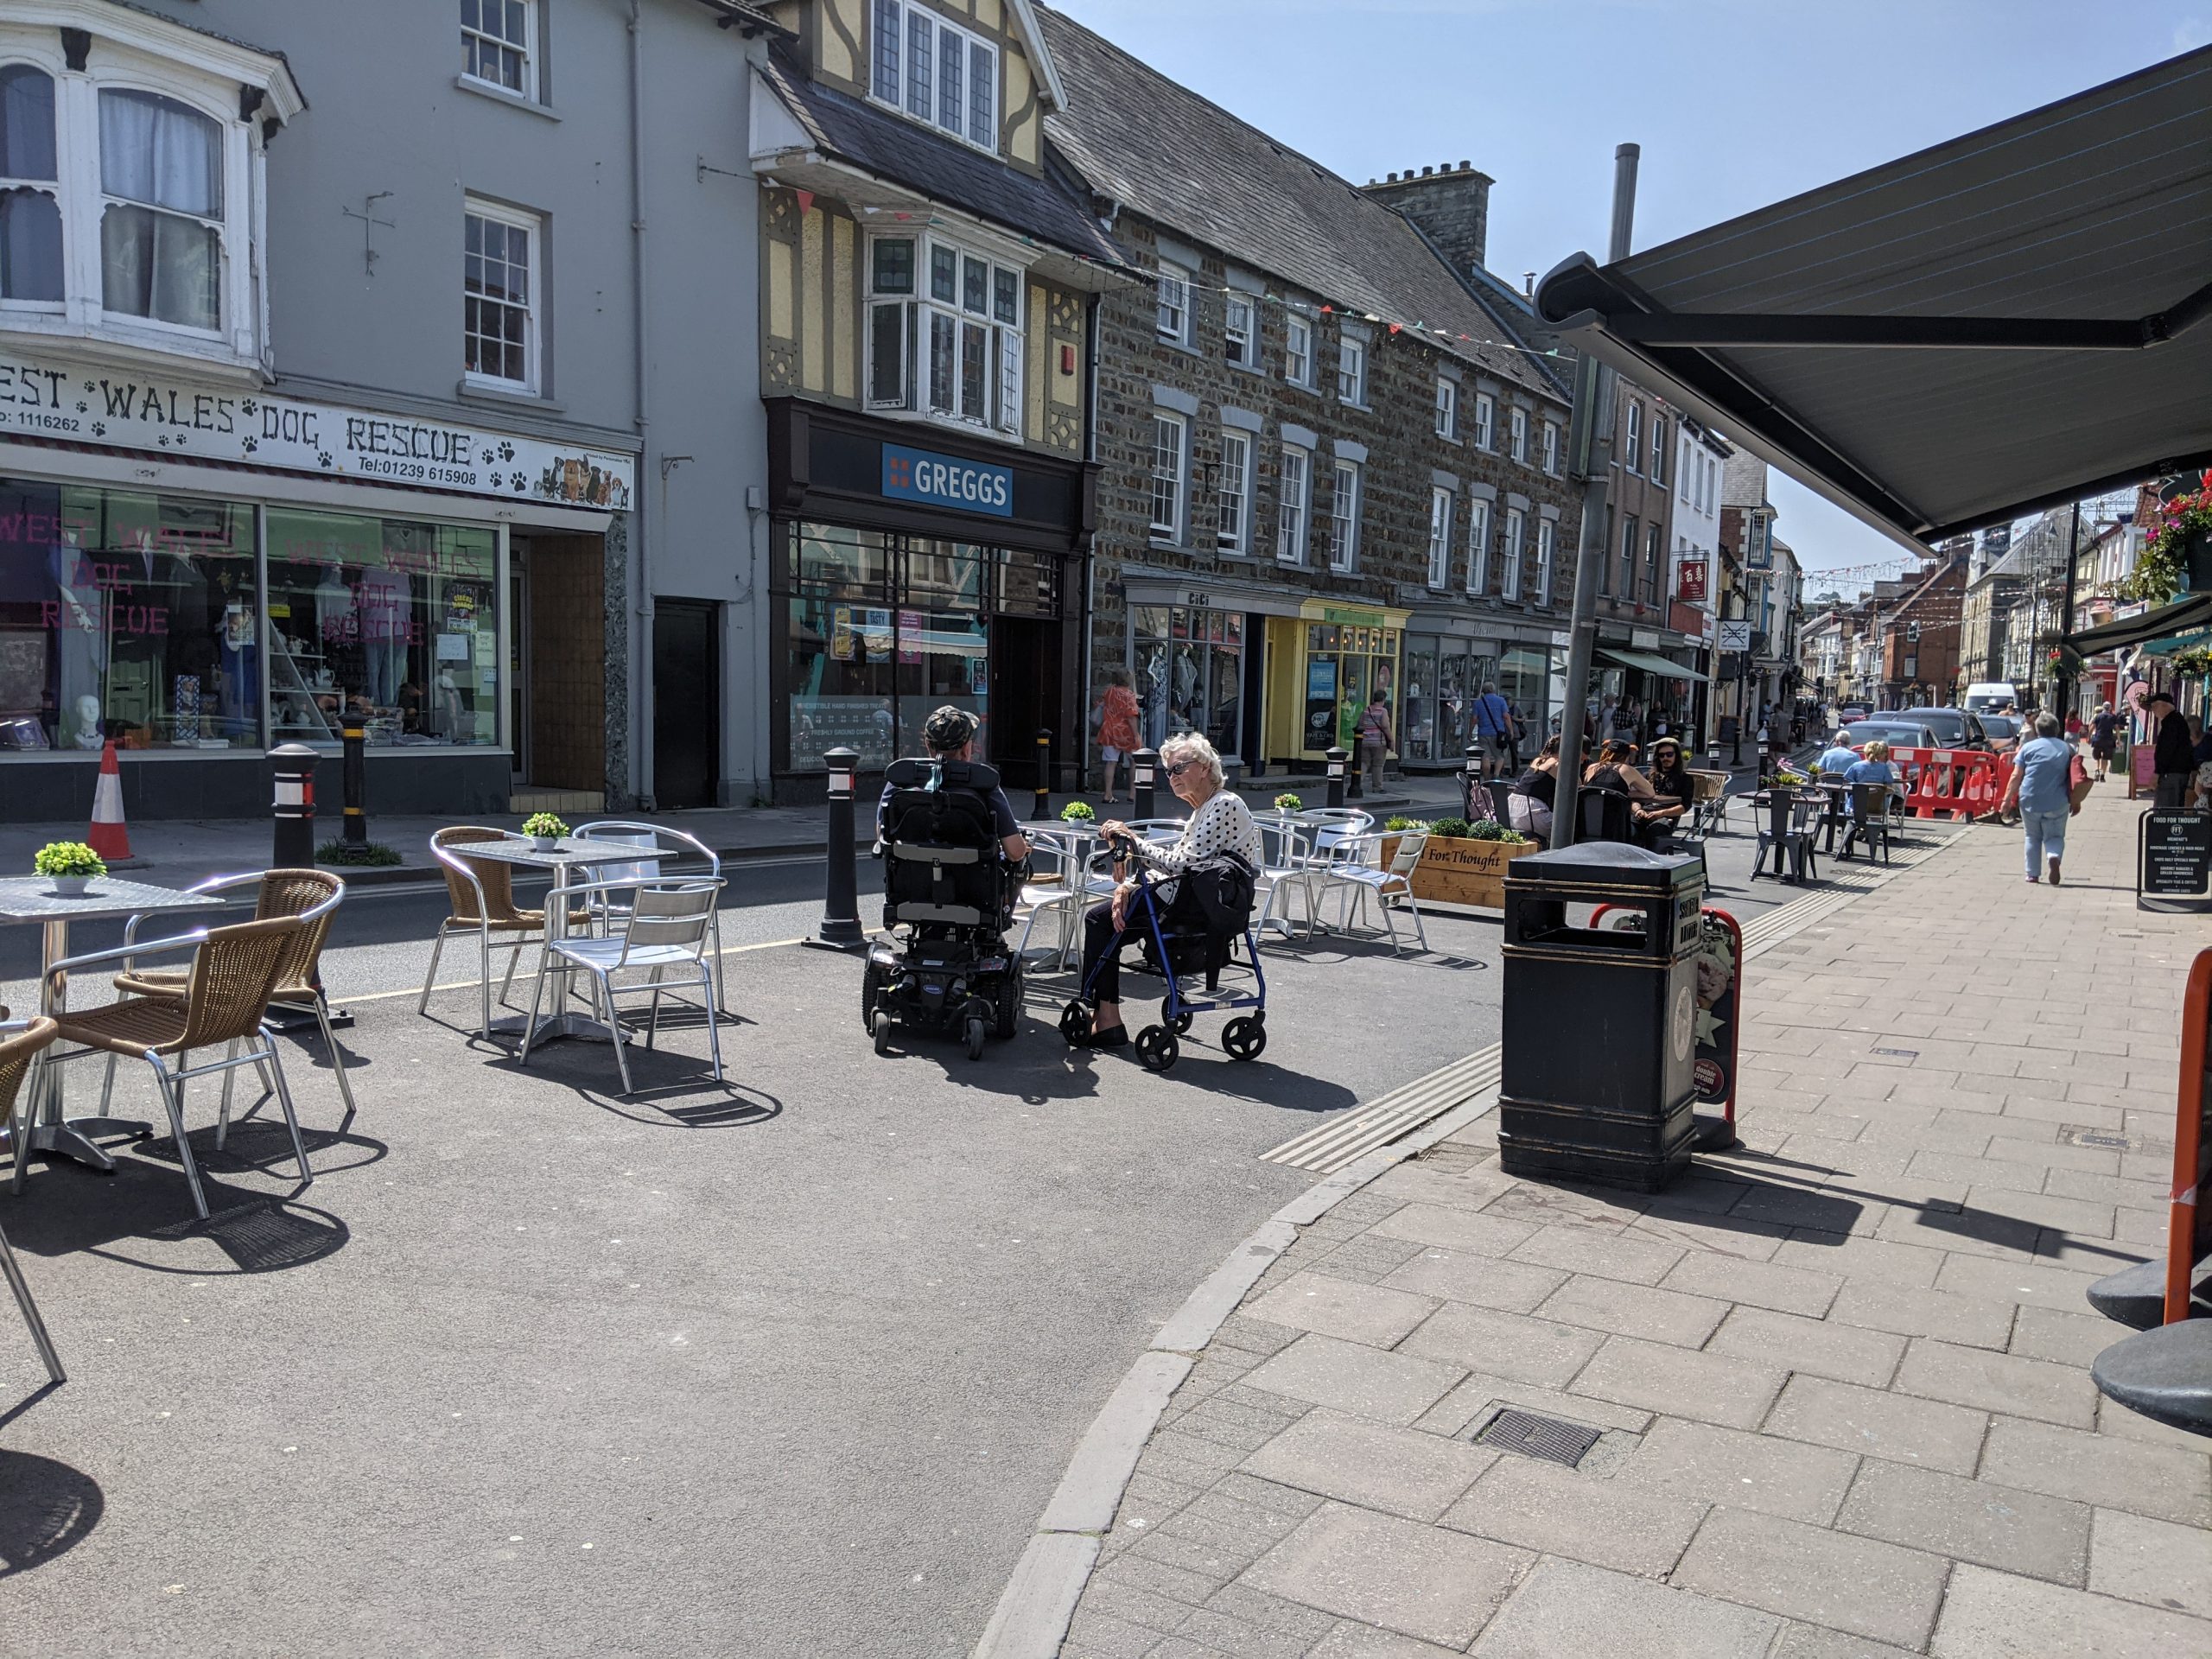 Town centre pedestrianised street with cafe and people sat at outdoor seating.